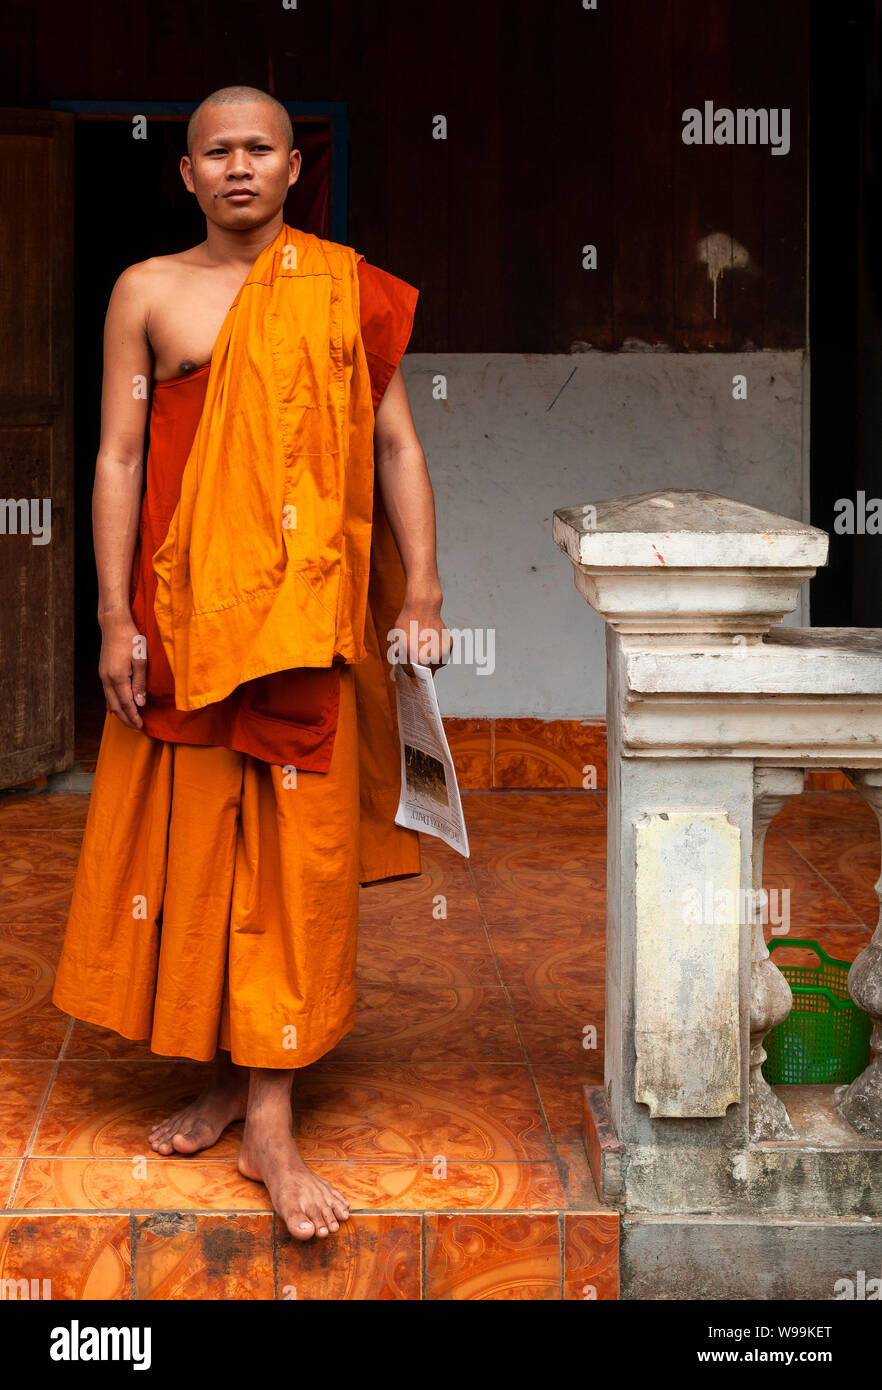 Portrait of a buddhist monk with traditional orange robe in a temple building in Siem Reap, Angkor region, Cambodia. Stock Photo